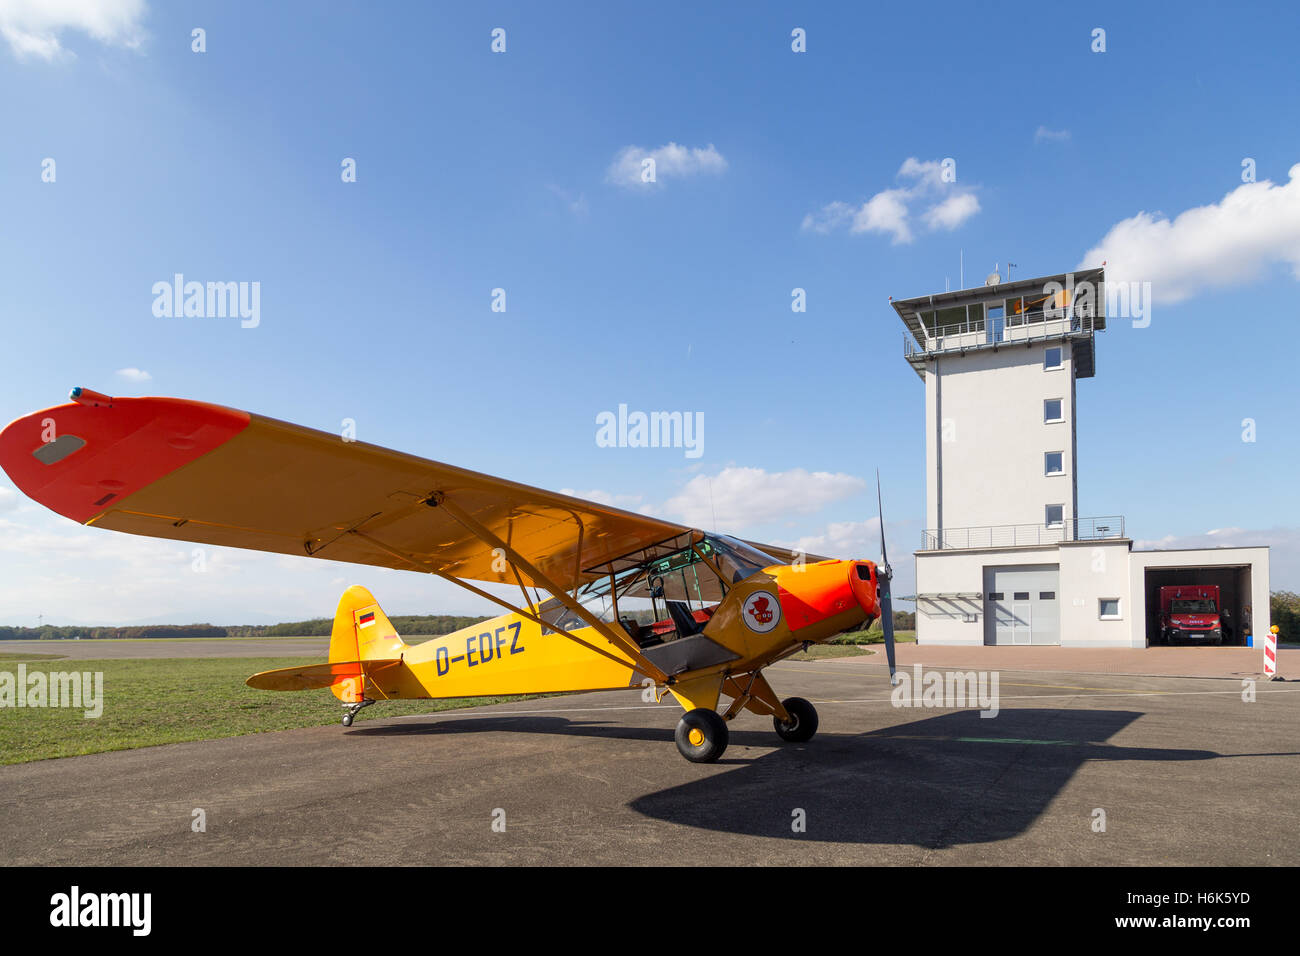 Bremgarten, Germany - October 22, 2016: A classic yellow Piper Cub aircraft parked at the airport Stock Photo